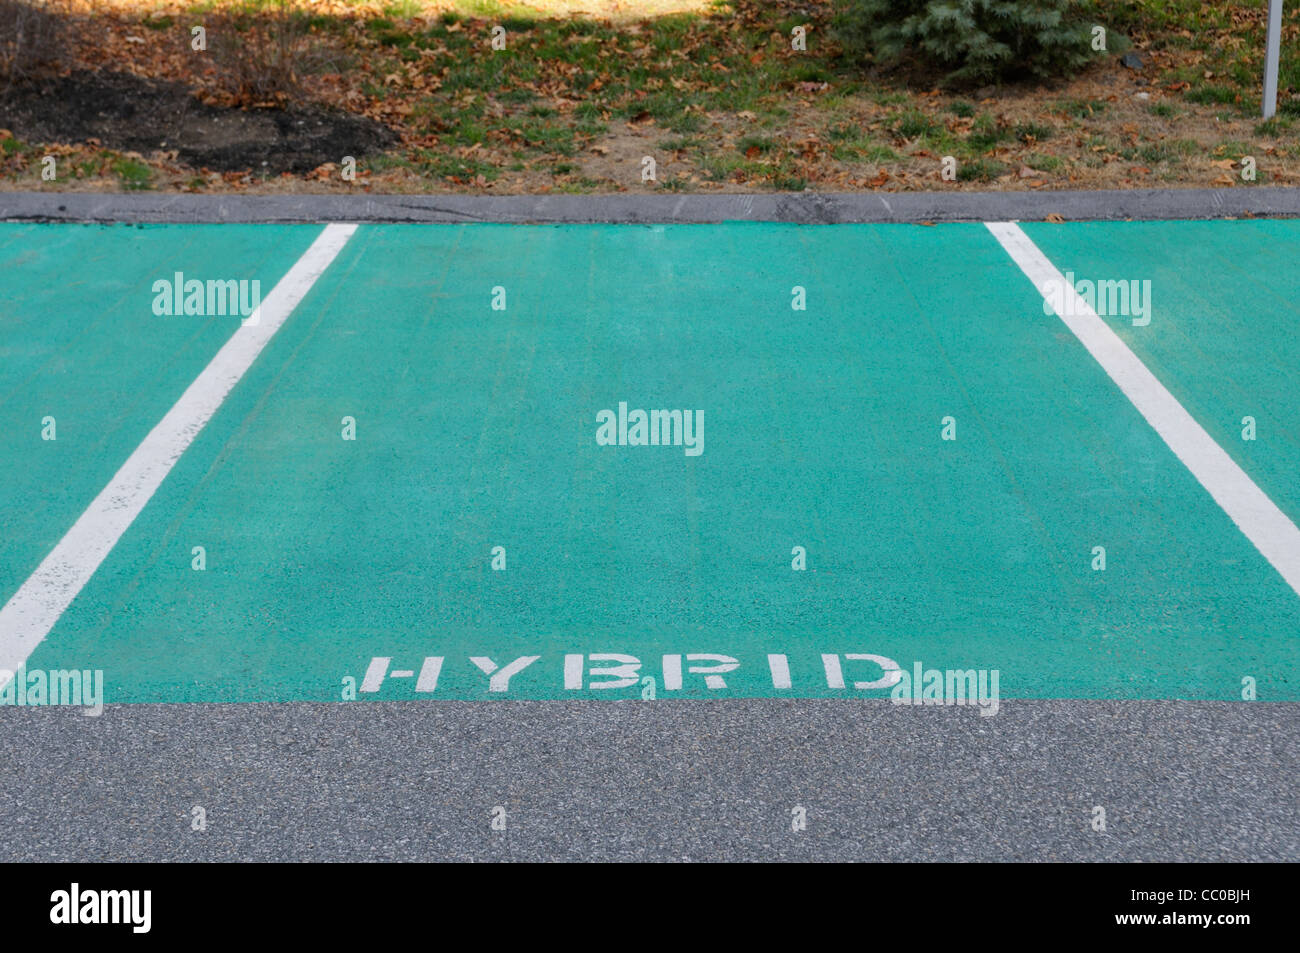 Preferred parking spaces reserved for hybrid gas-electric cars at an eco-friendly hotel in Massachusetts Stock Photo